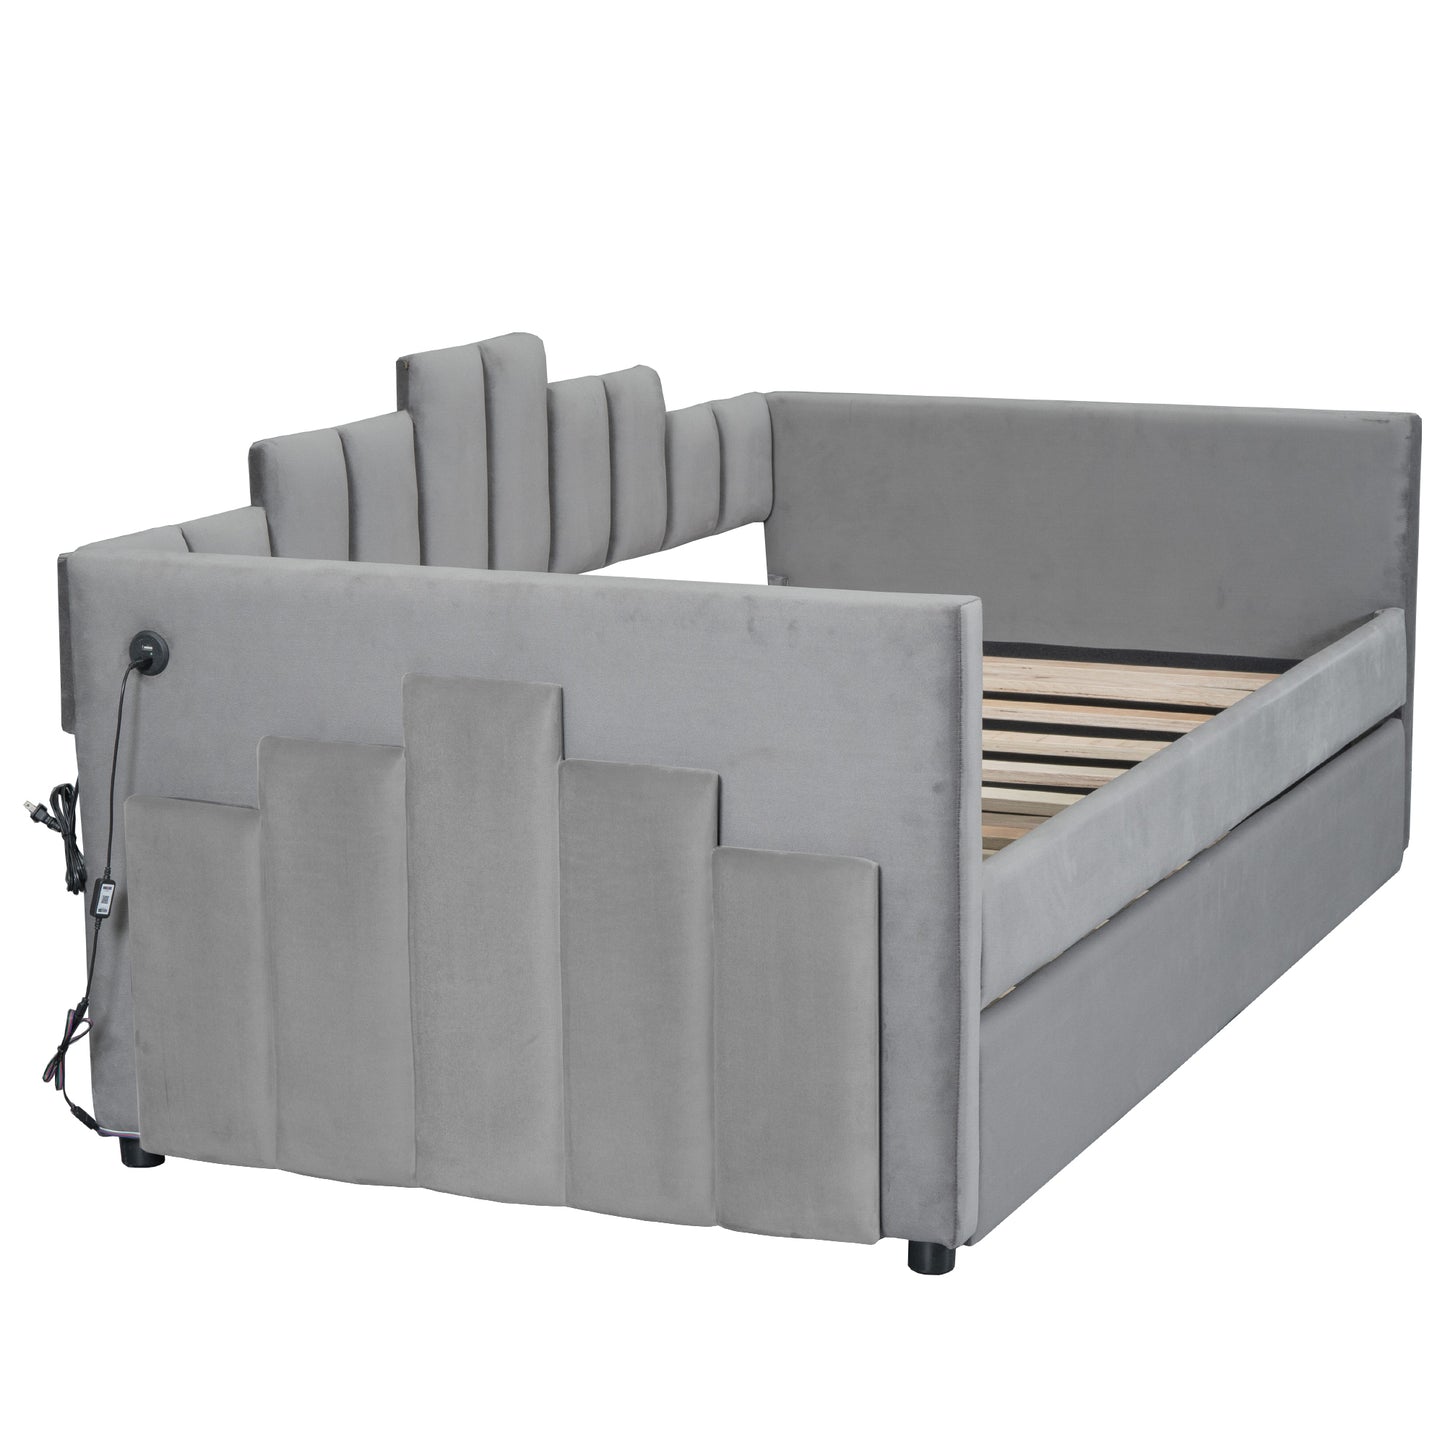 Modern LED Gray Daybed with Trundle (twin)